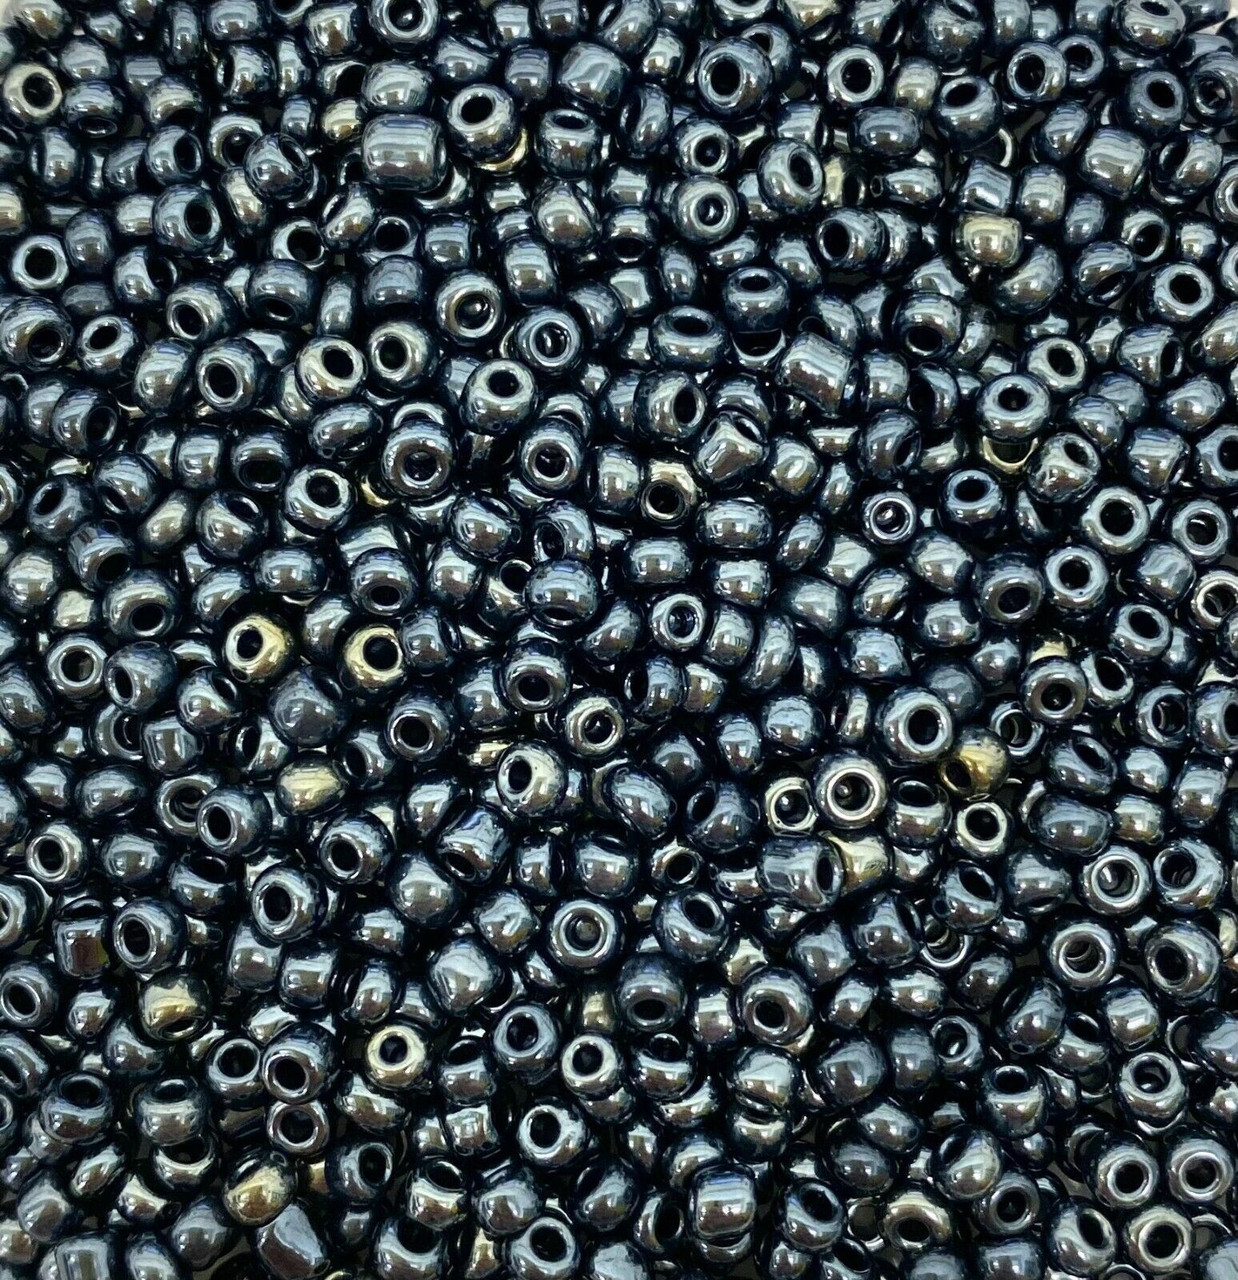 Black Opaque Lustered 8/0 seed beads